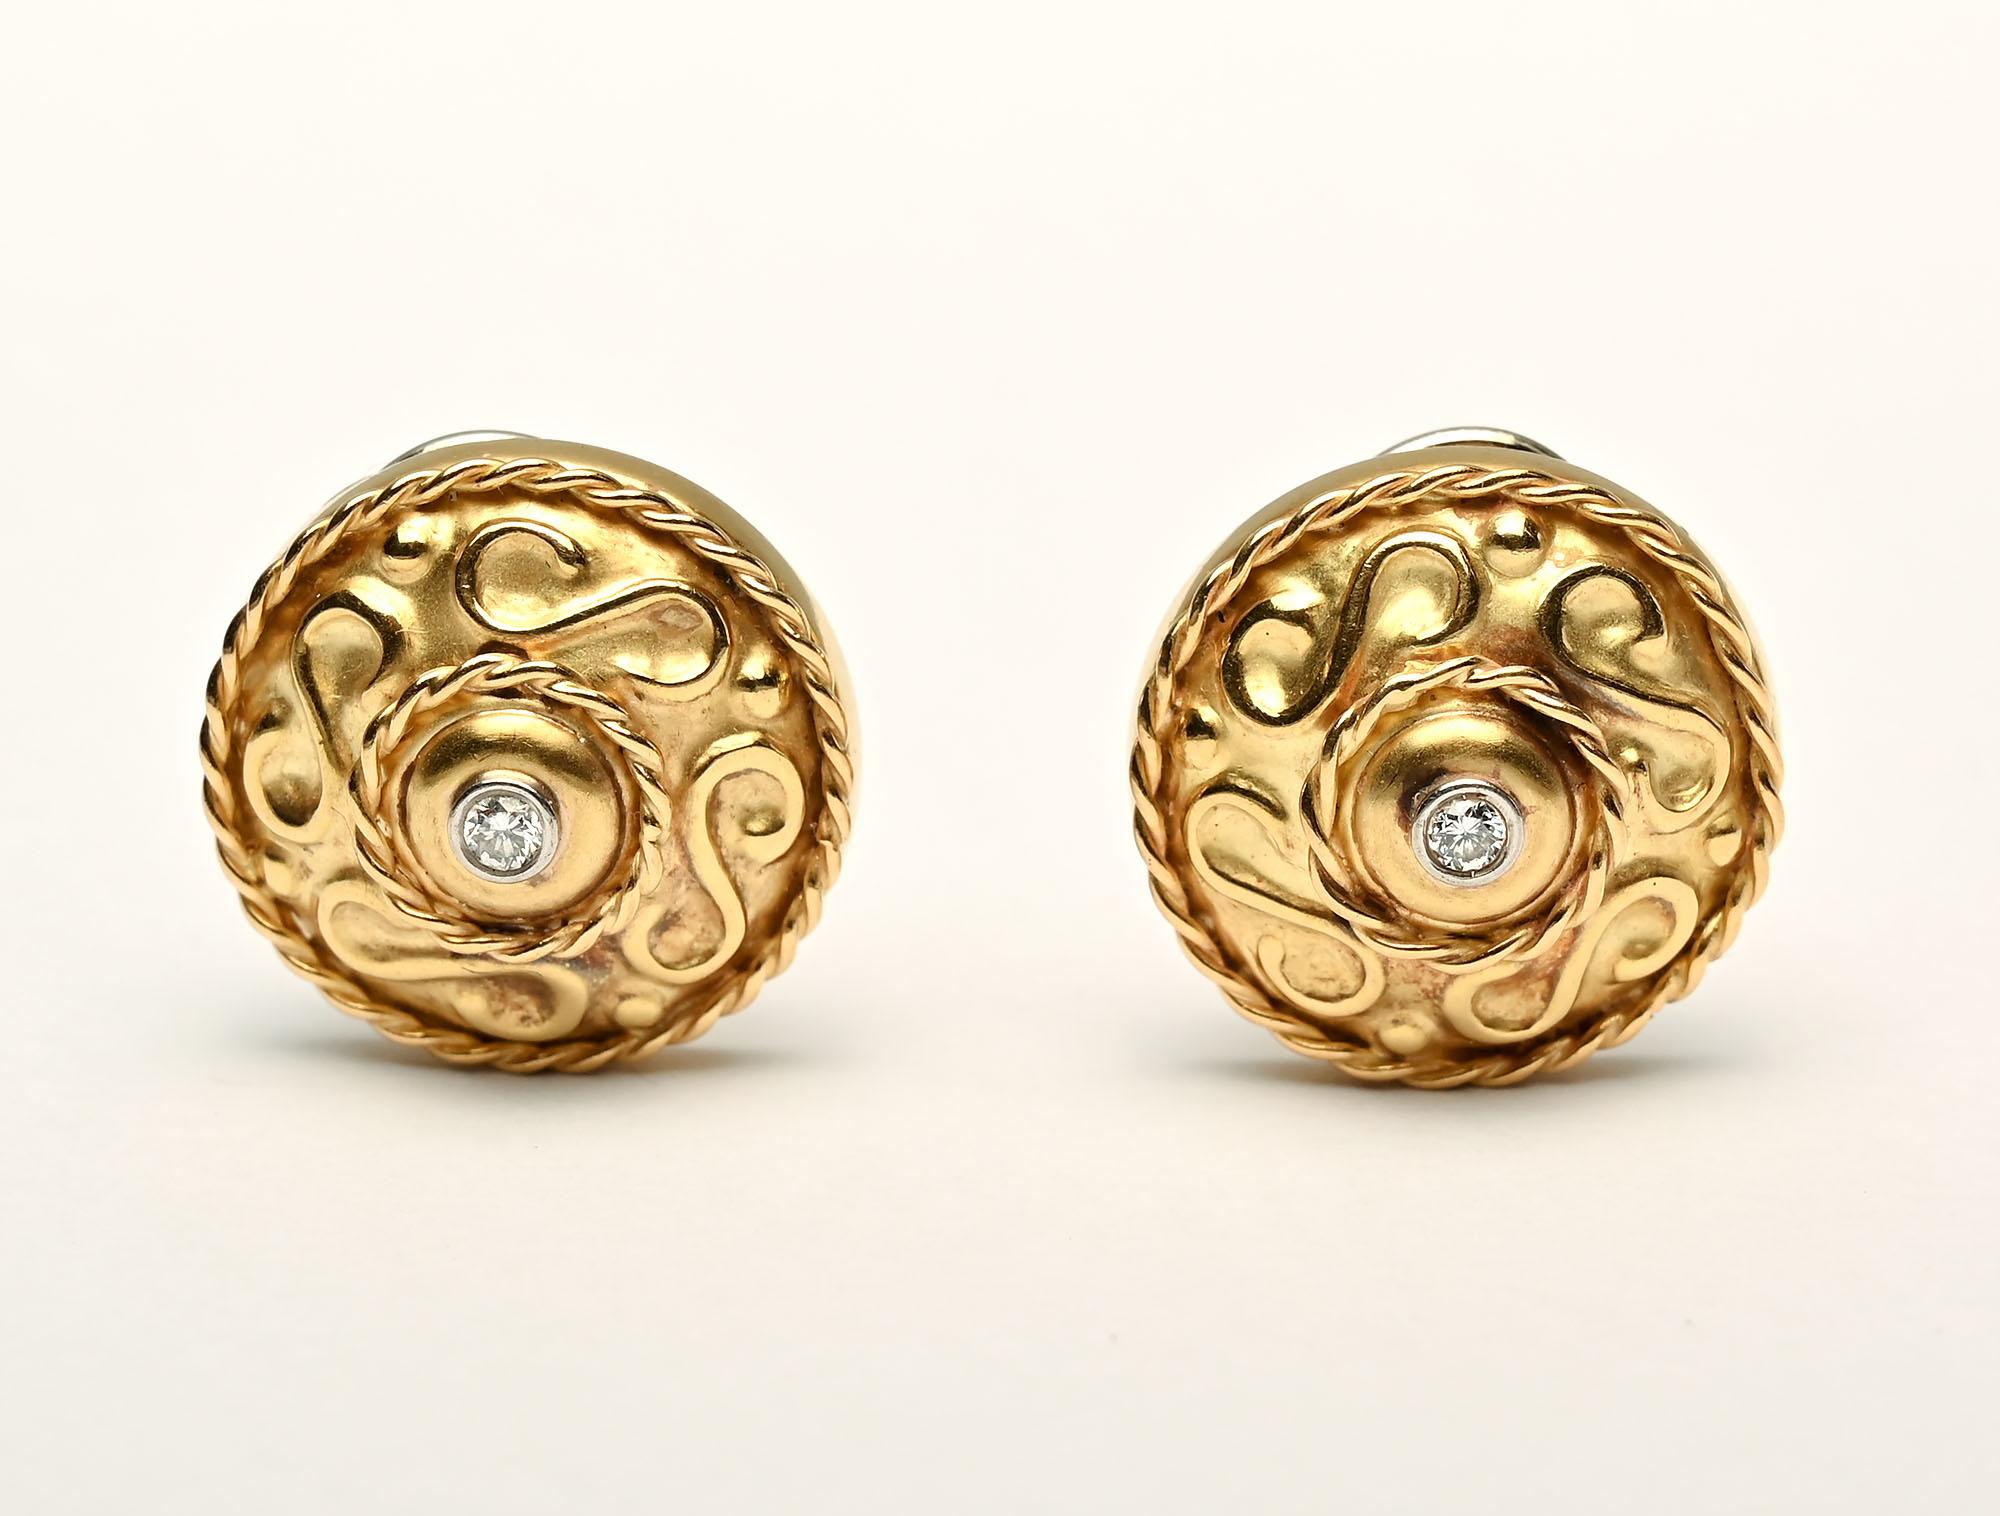 Nicely sculptural 18 karat round earrings, each centered with a diamond. Twisted gold banding around the curvilinear interior design. Signed ANF by the maker. They measure 3/4